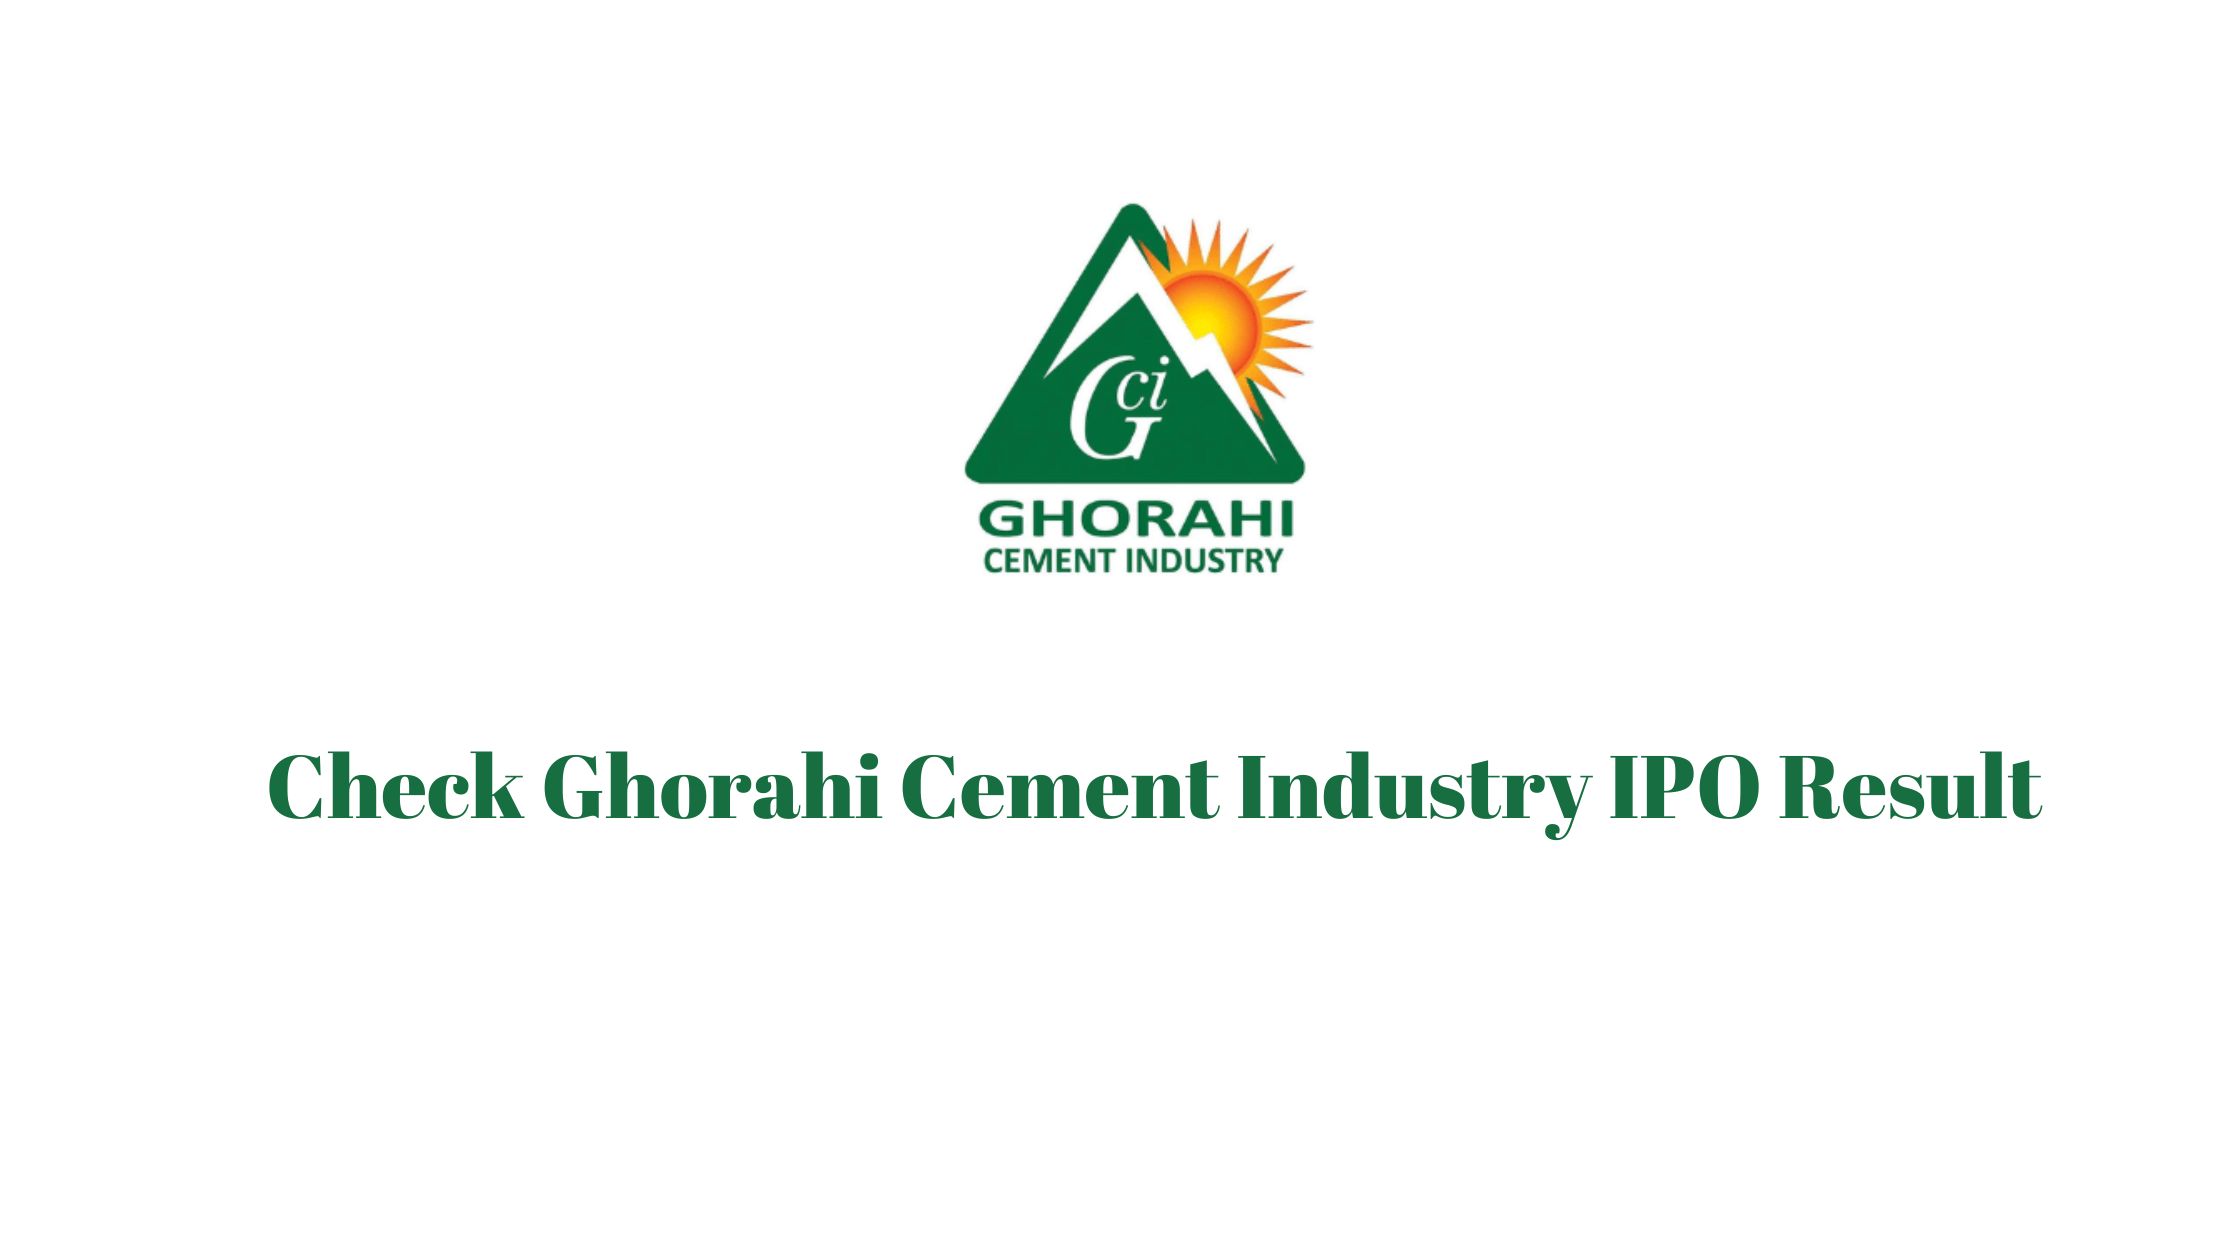 Check Ghorahi Cement Industry IPO Result